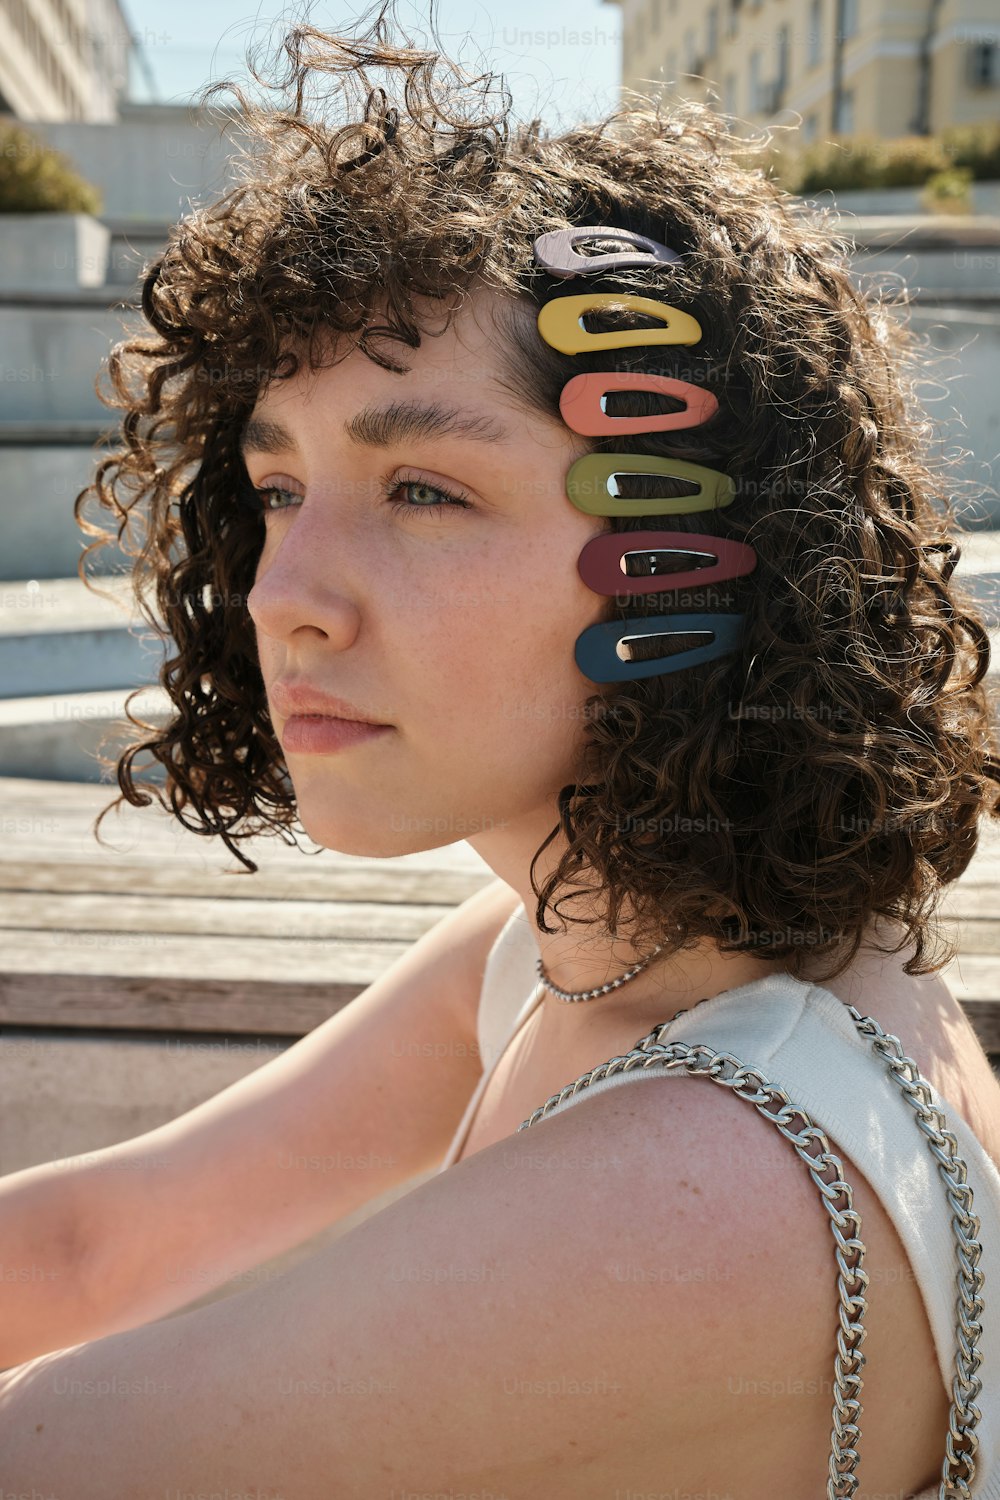 a woman with curly hair has a bunch of hair clips on her head